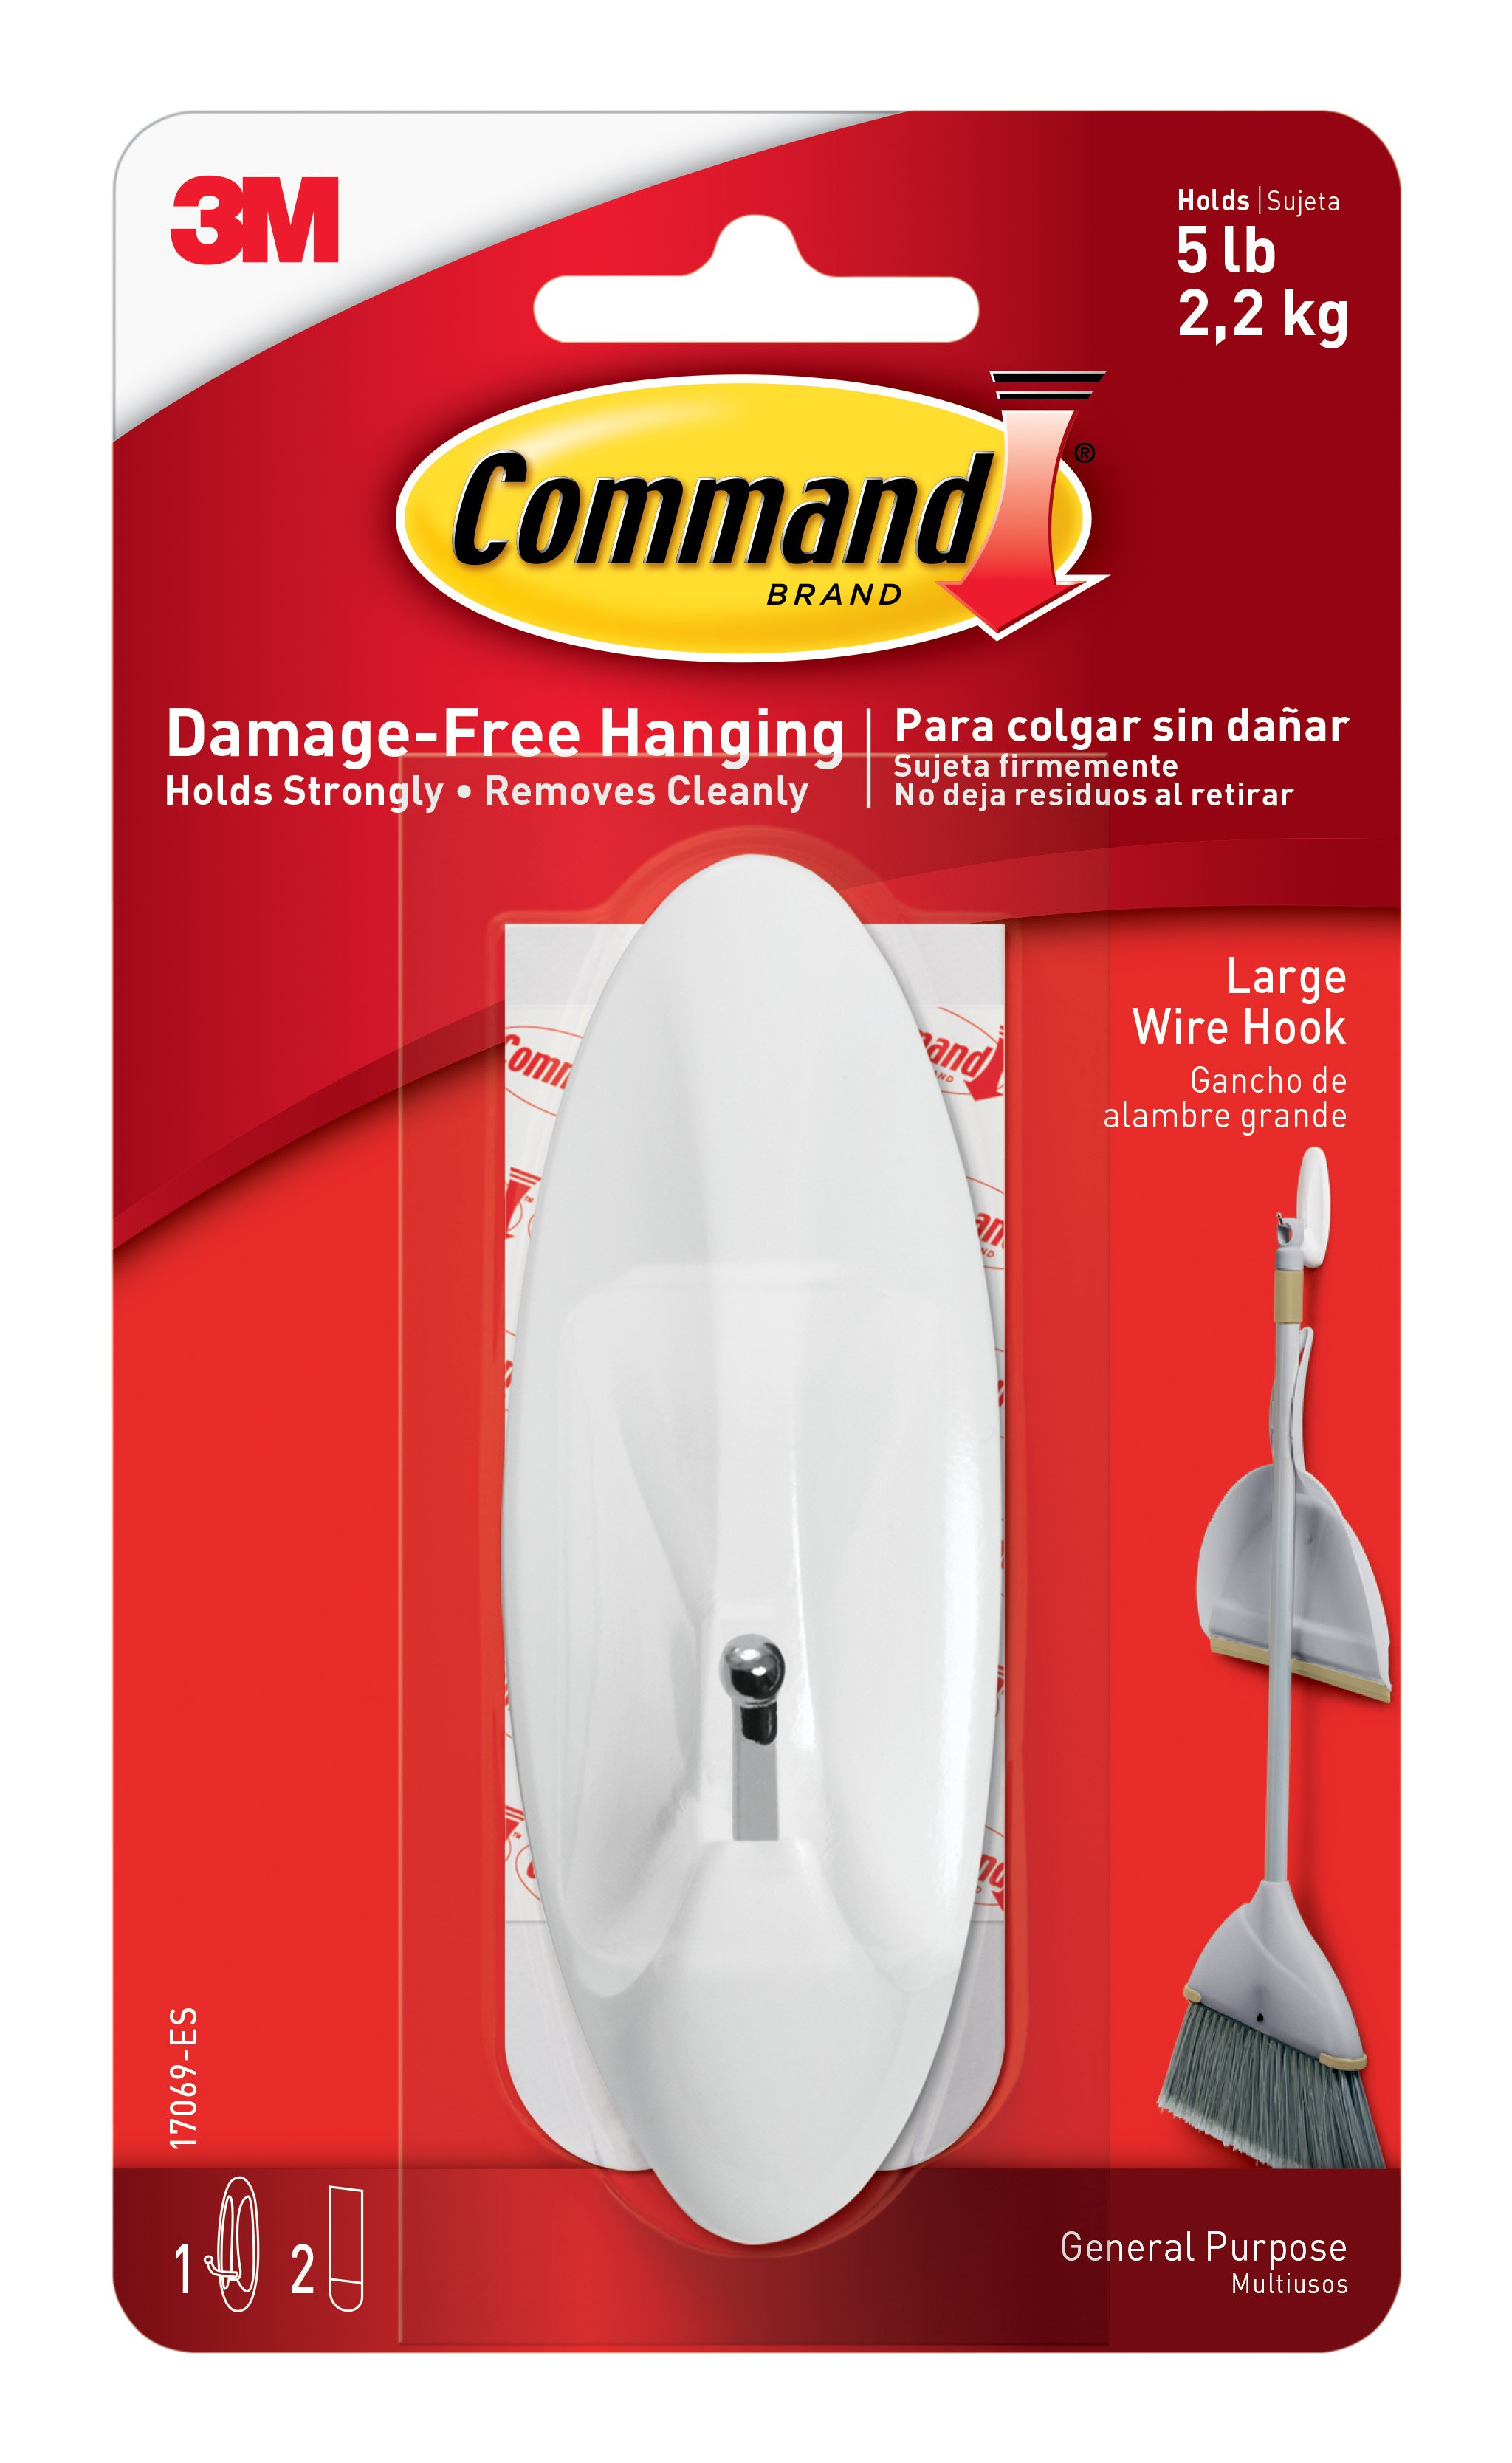 4 x 3M Command Large Wire Hook/Strips For Damage Free Hanging Holds Up To 2kg 